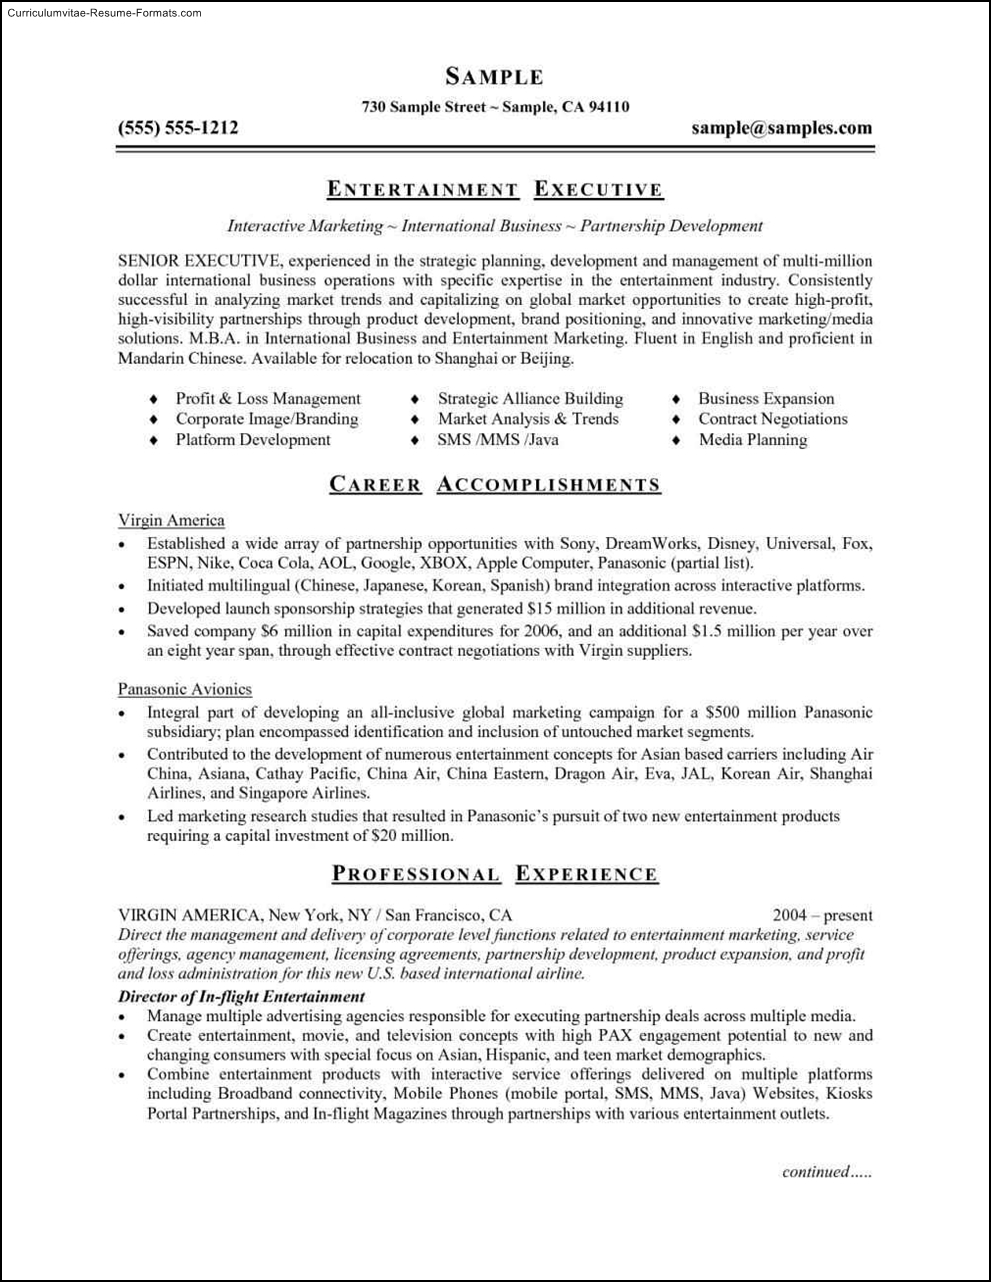 office 2010 resume templates download